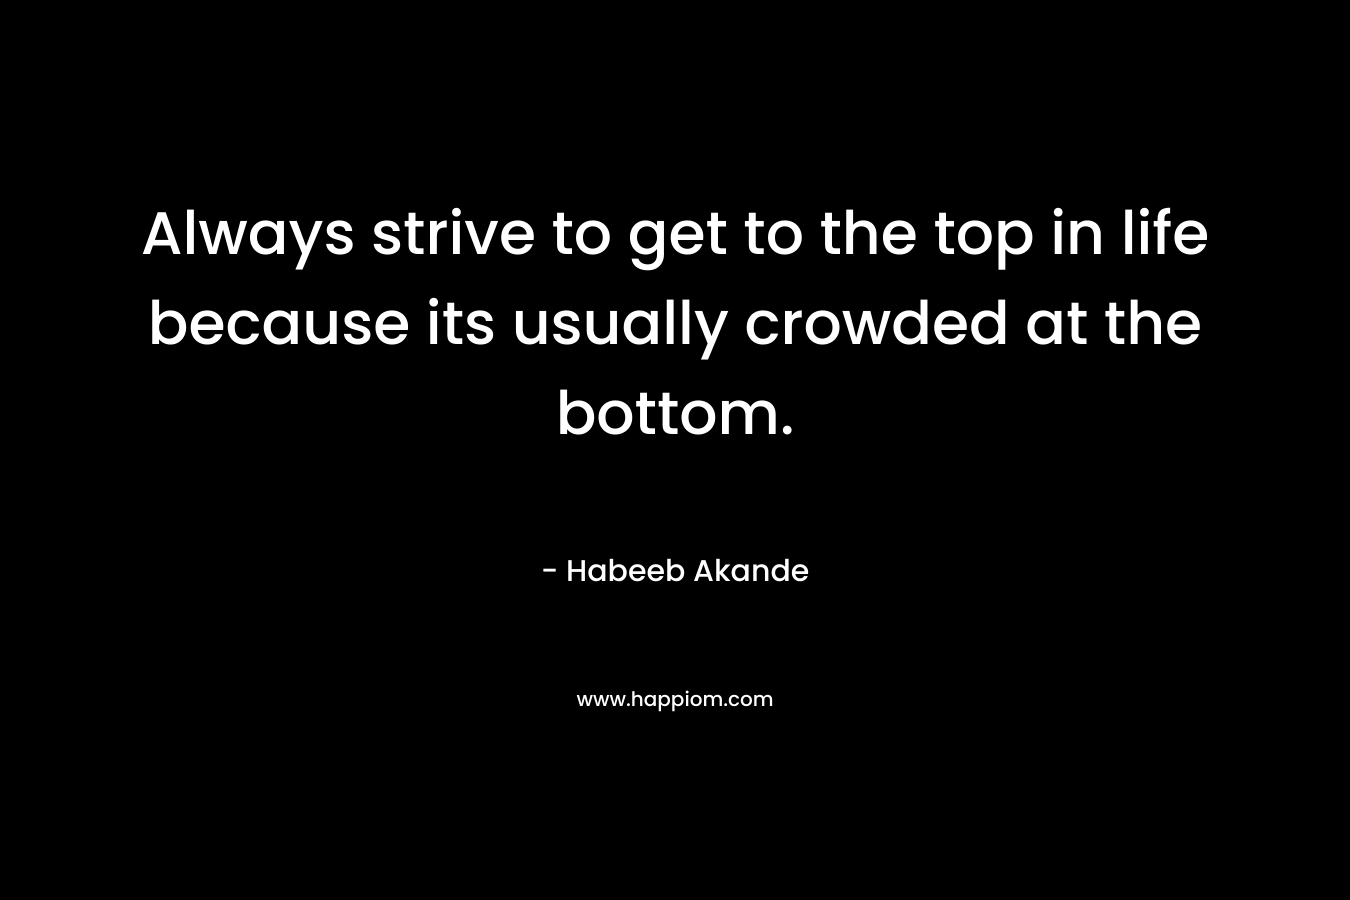 Always strive to get to the top in life because its usually crowded at the bottom. – Habeeb Akande